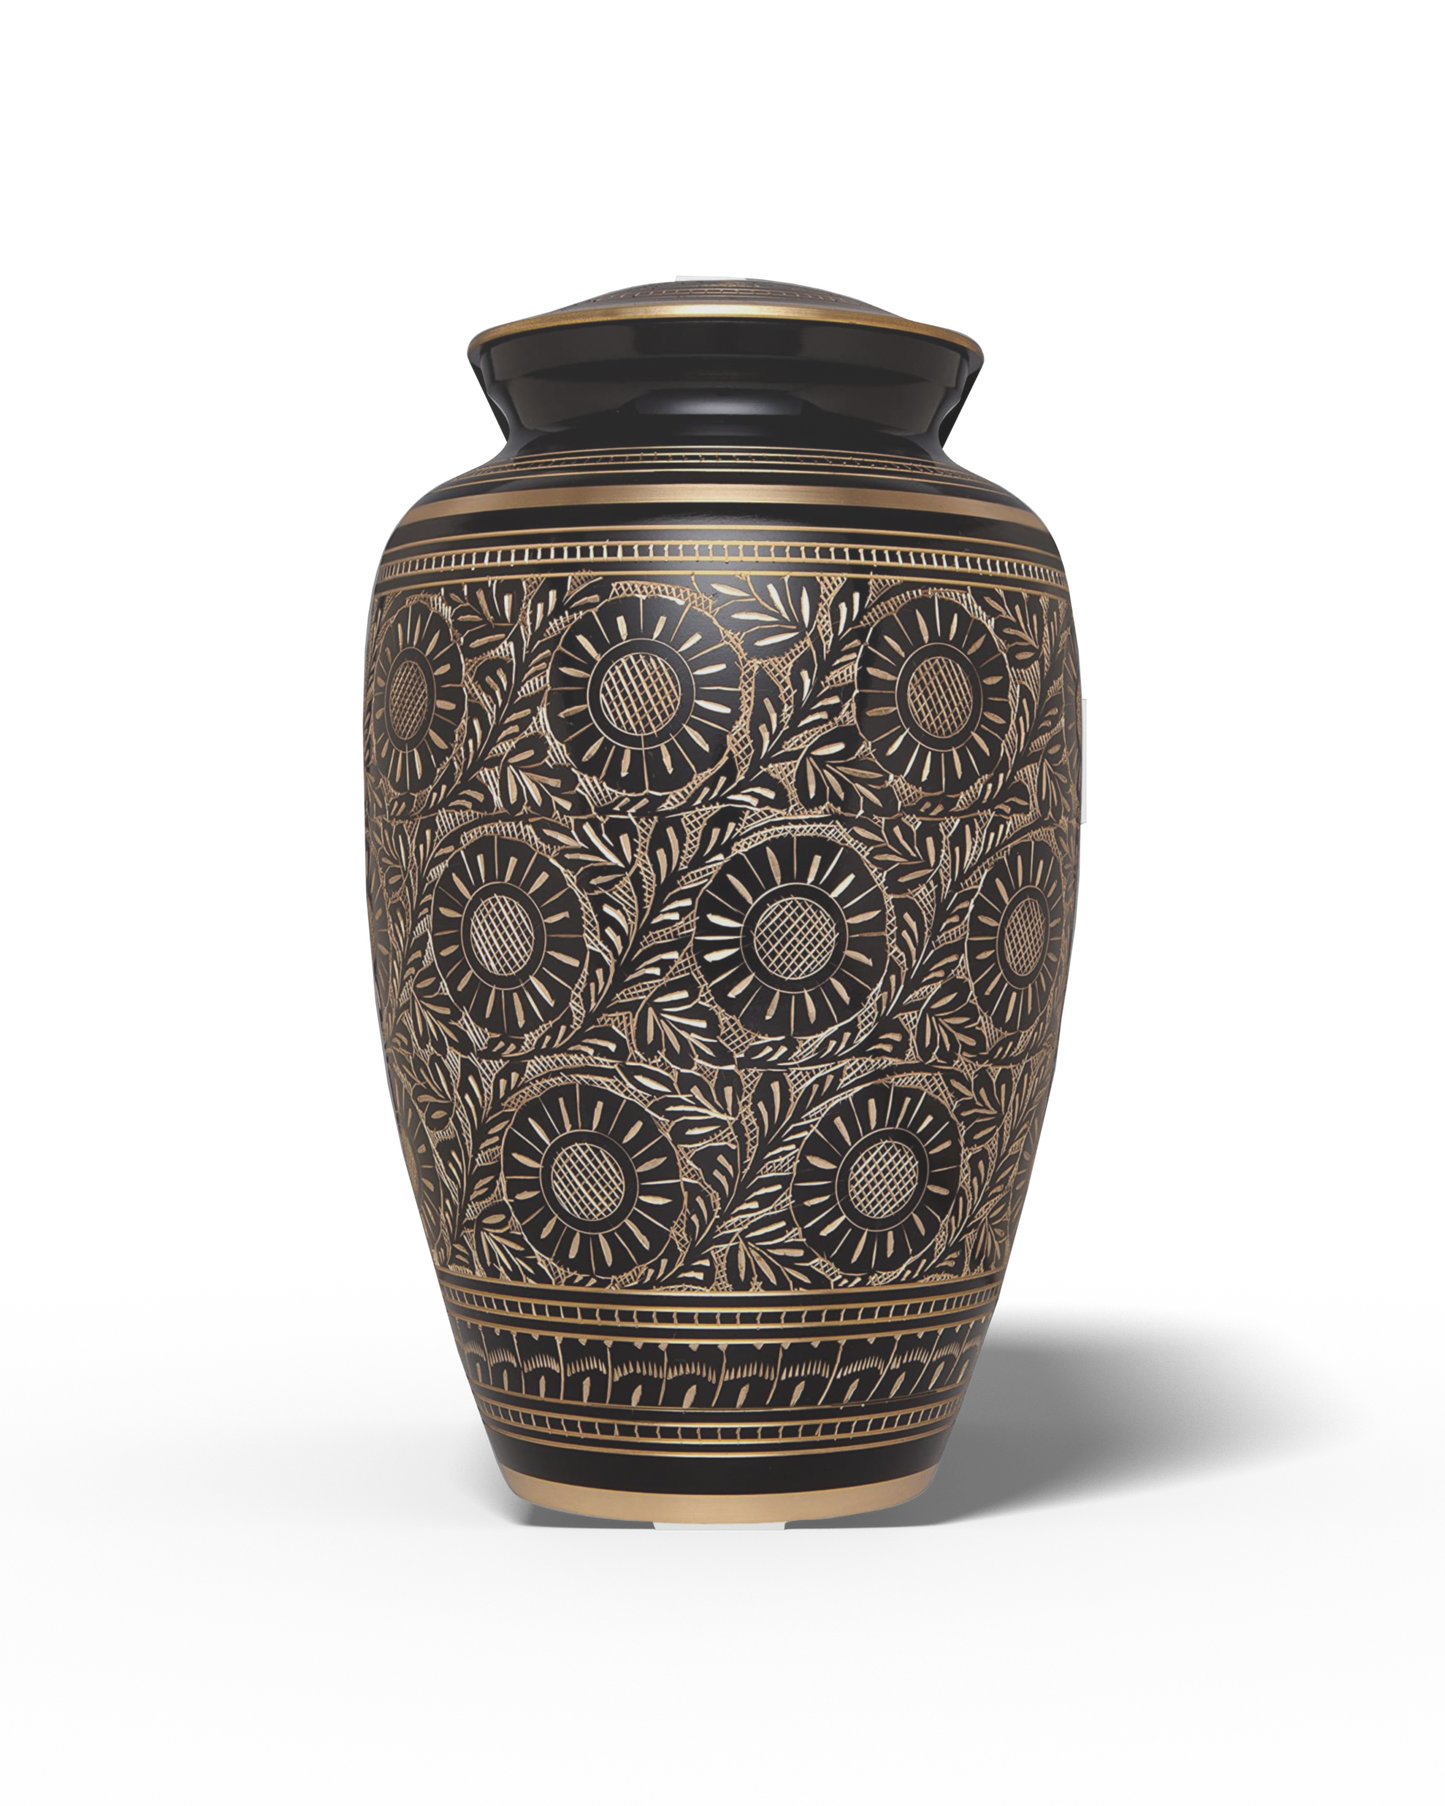 Armastus Adult Ashes Urn-Adult Urn for Ashes-Cremation Urns- The cremation urns for ashes and keepsakes for ashes come in a variety of styles to suit most tastes, decor and different volumes of funeral ashes.